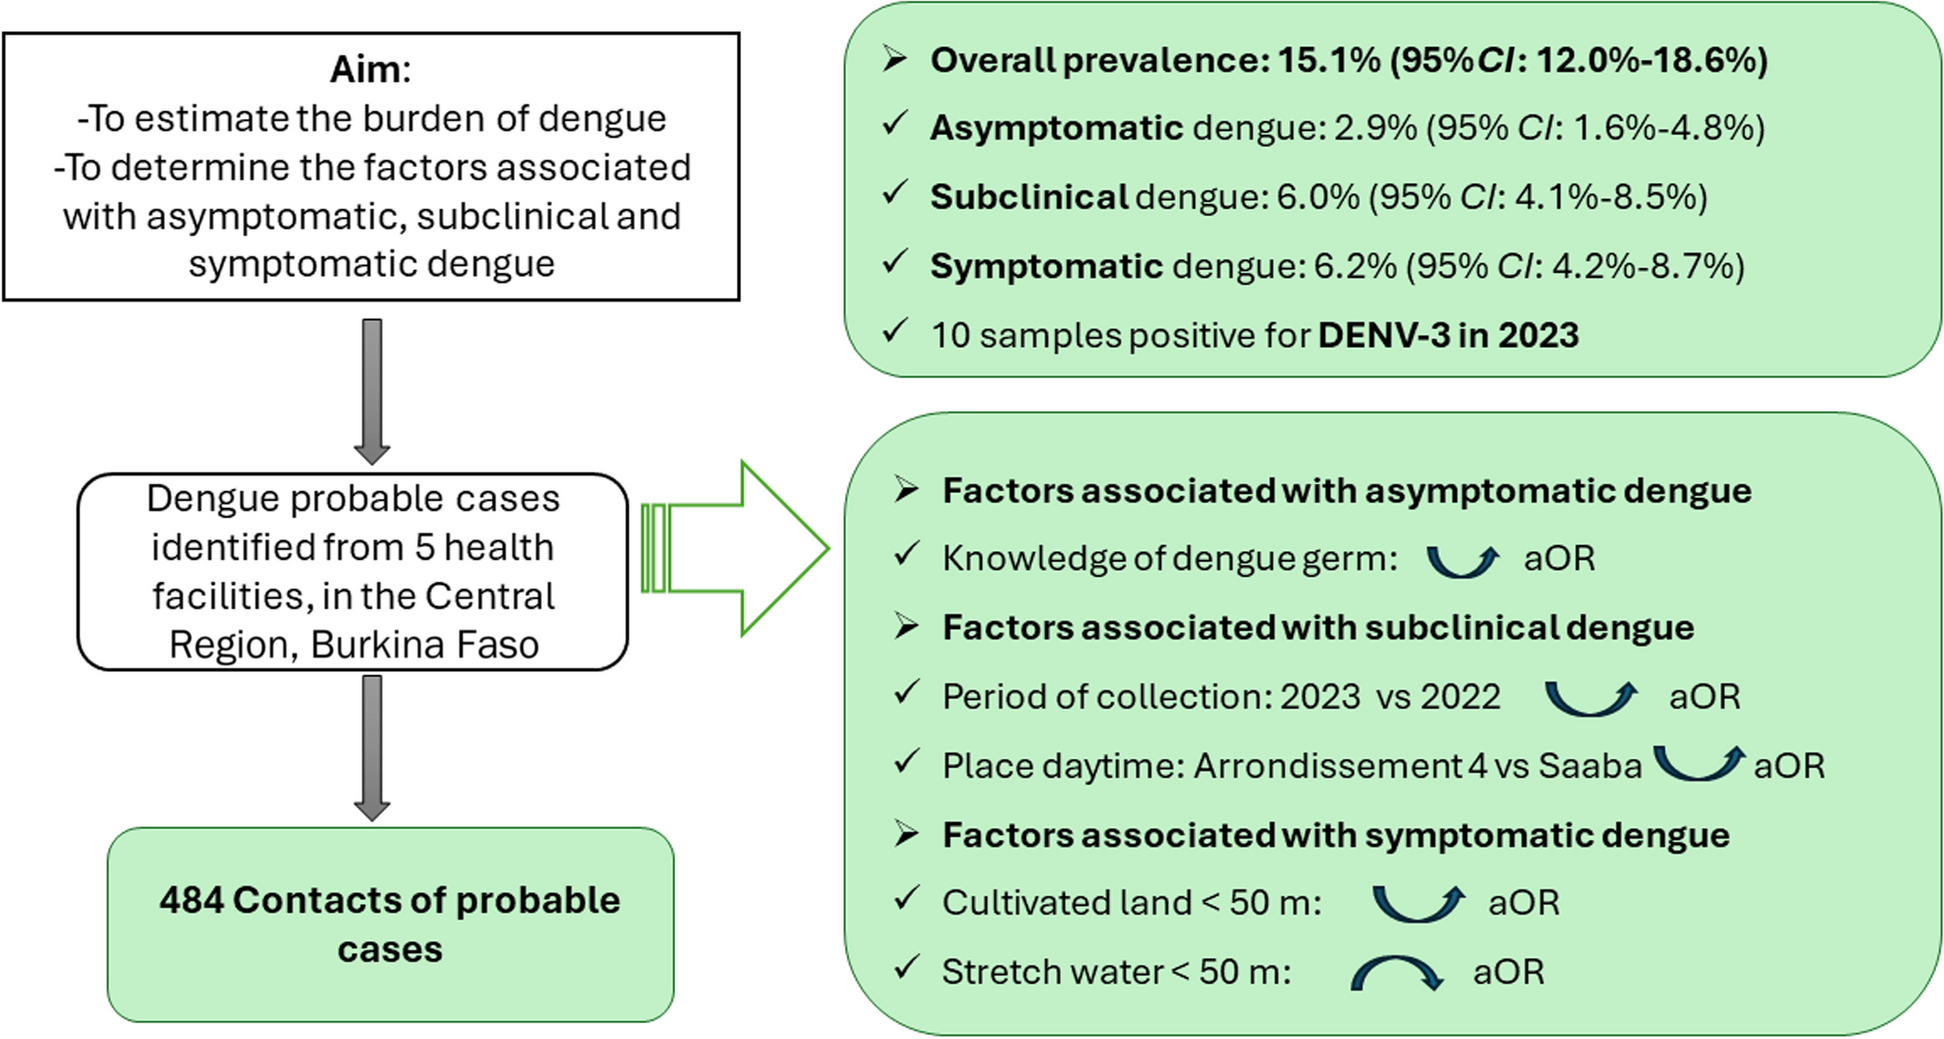 Estimating dengue burden among family contacts through cluster investigation around probable cases in 2022 and 2023 in the Central Region, Burkina Faso